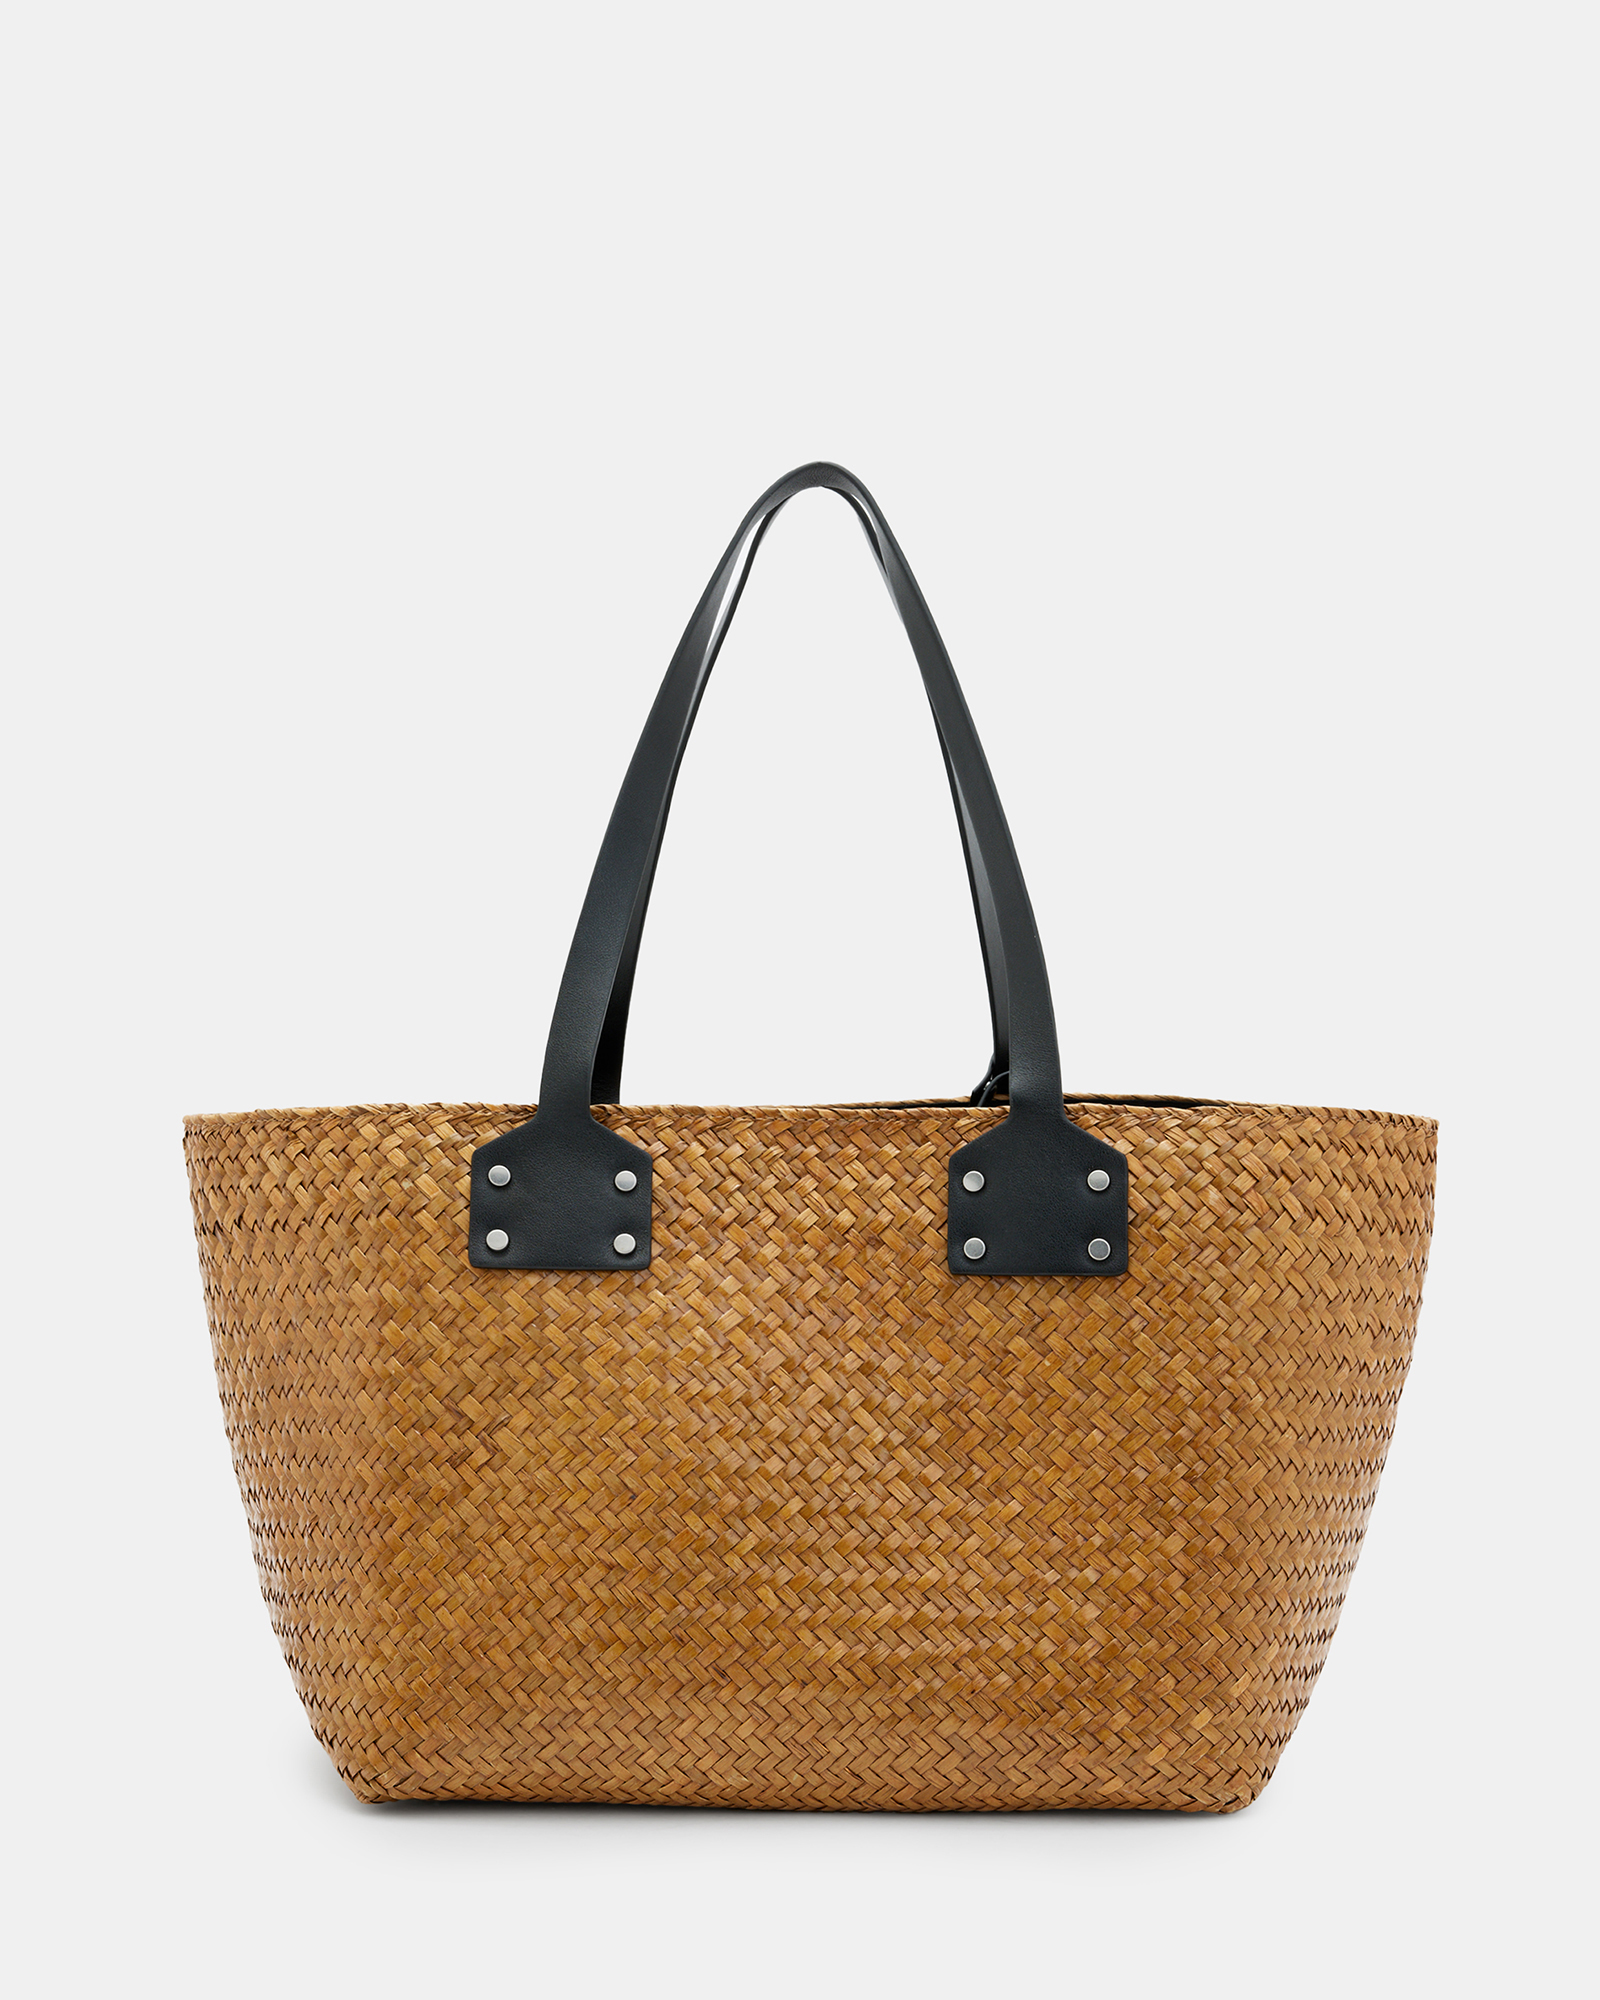 AllSaints Mosley Straw Tote Bag,, Size: One